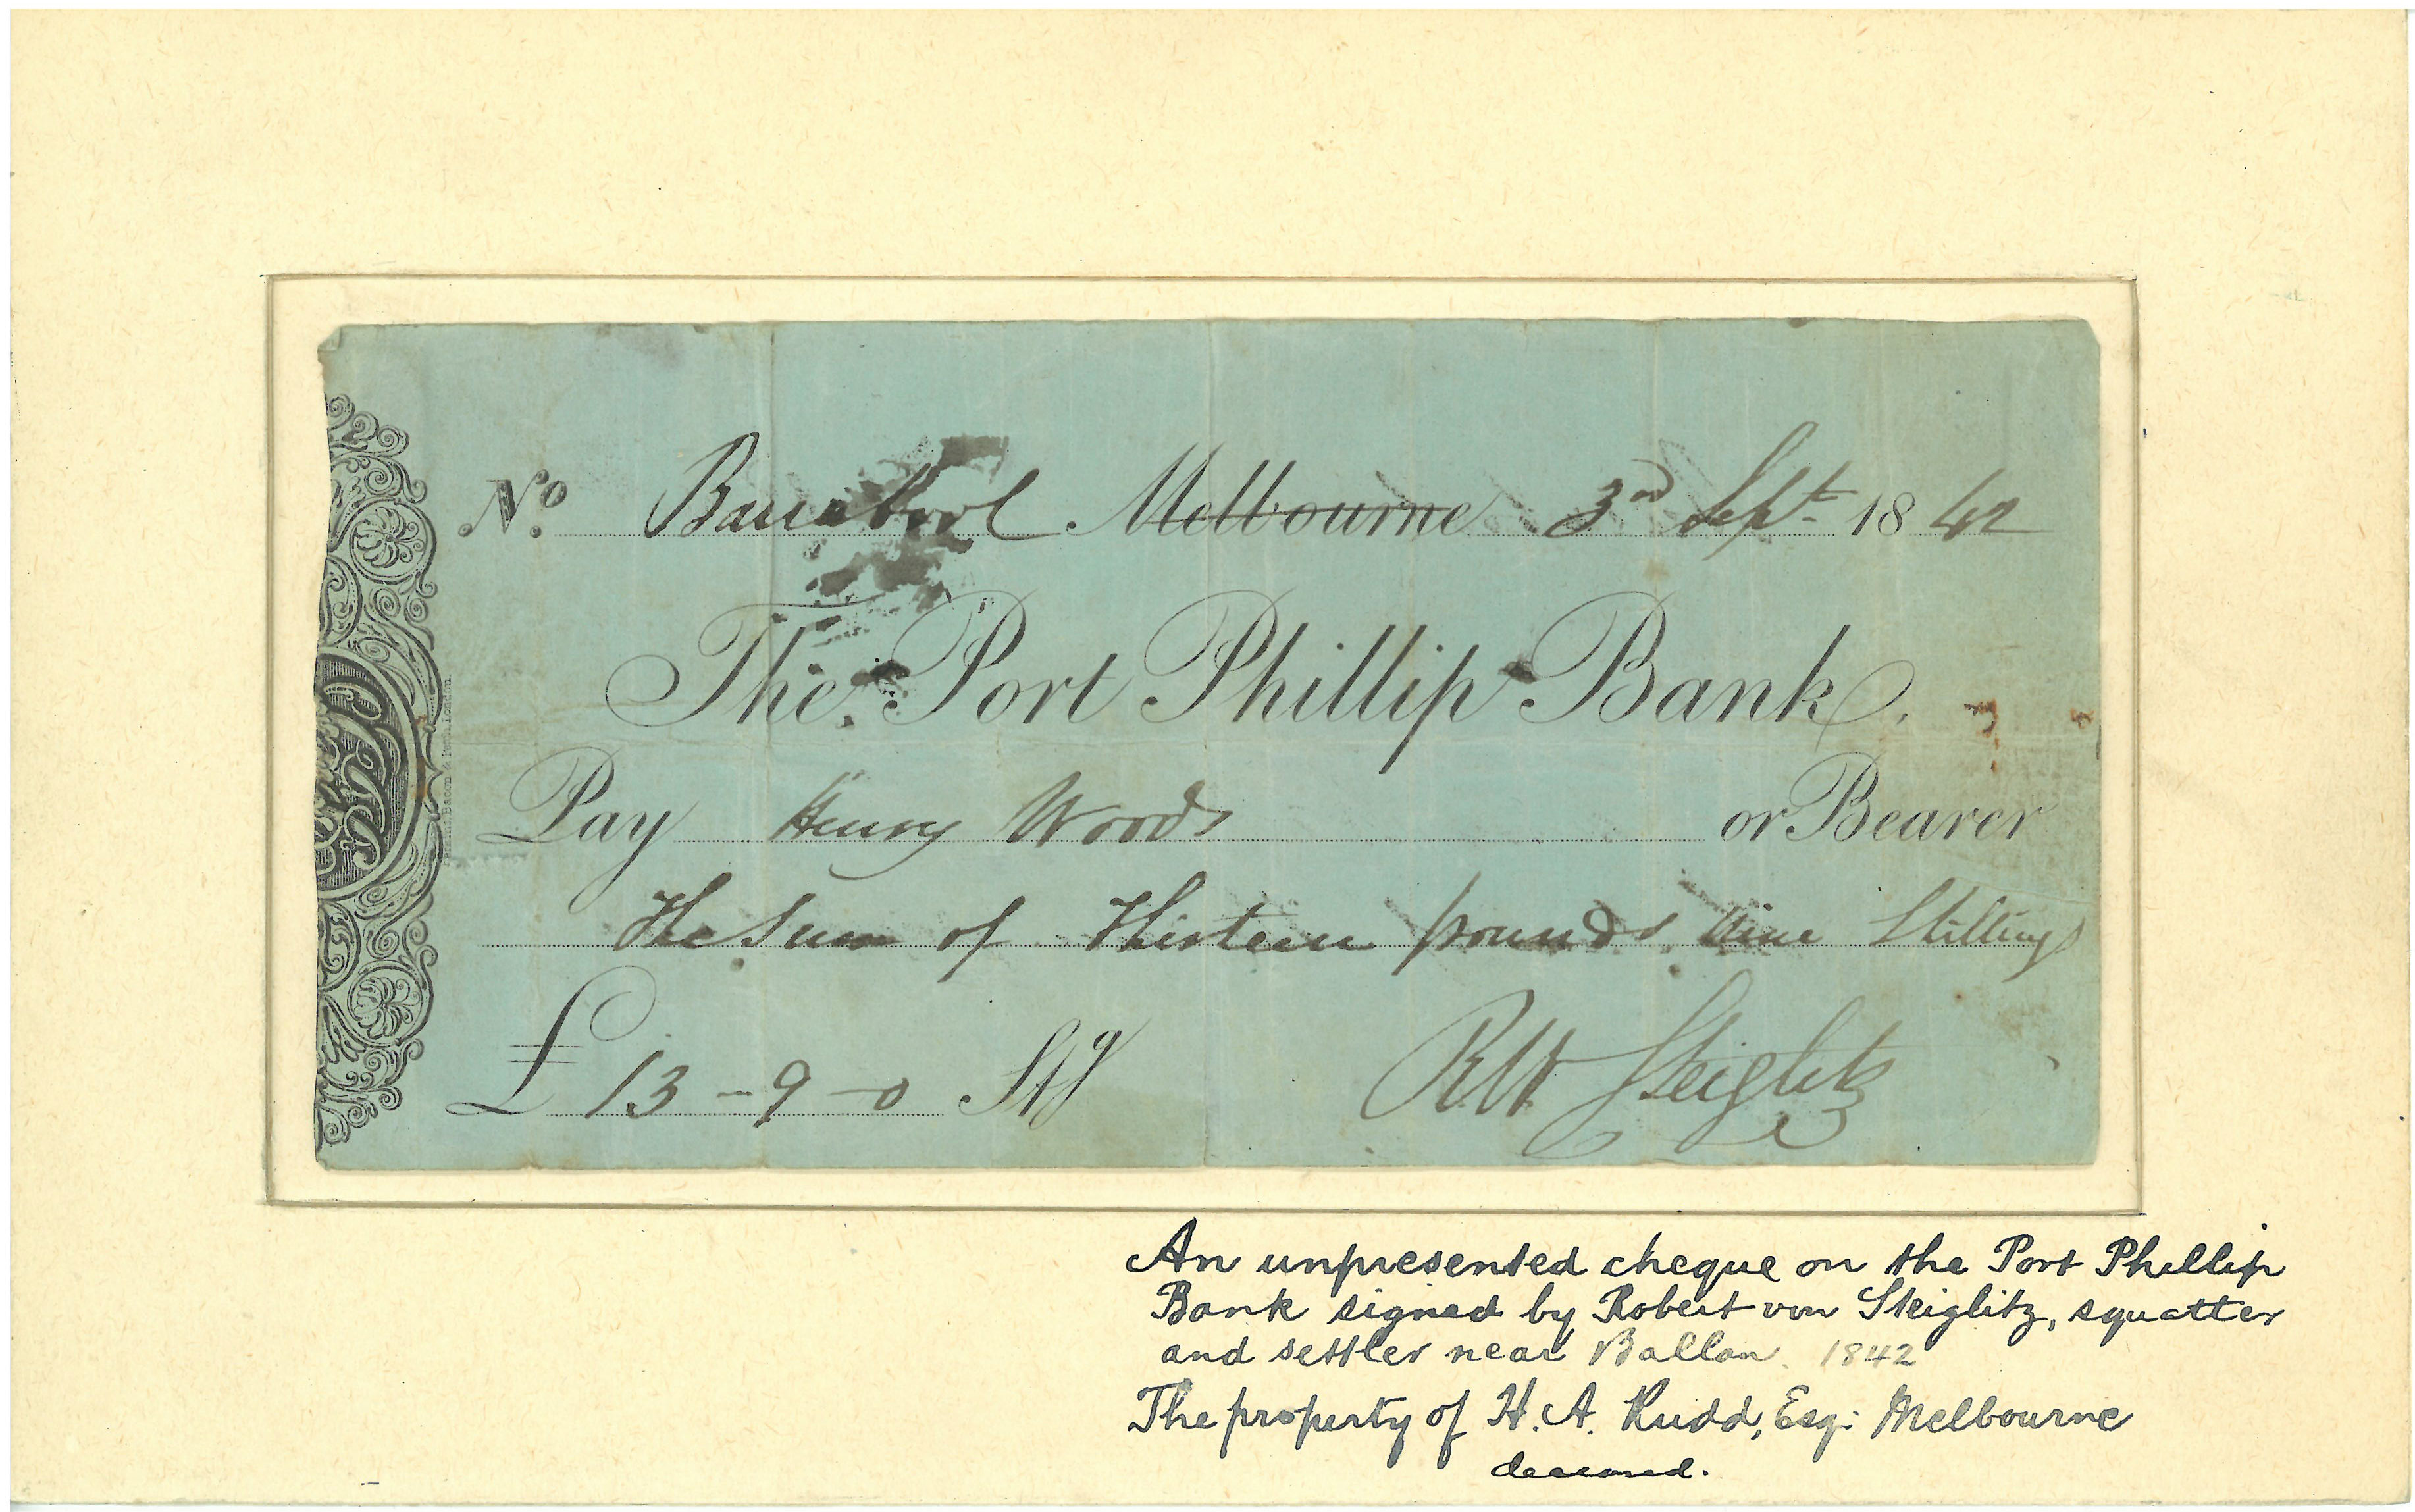 An unpresented Port Phillip Bank cheque dated 1842